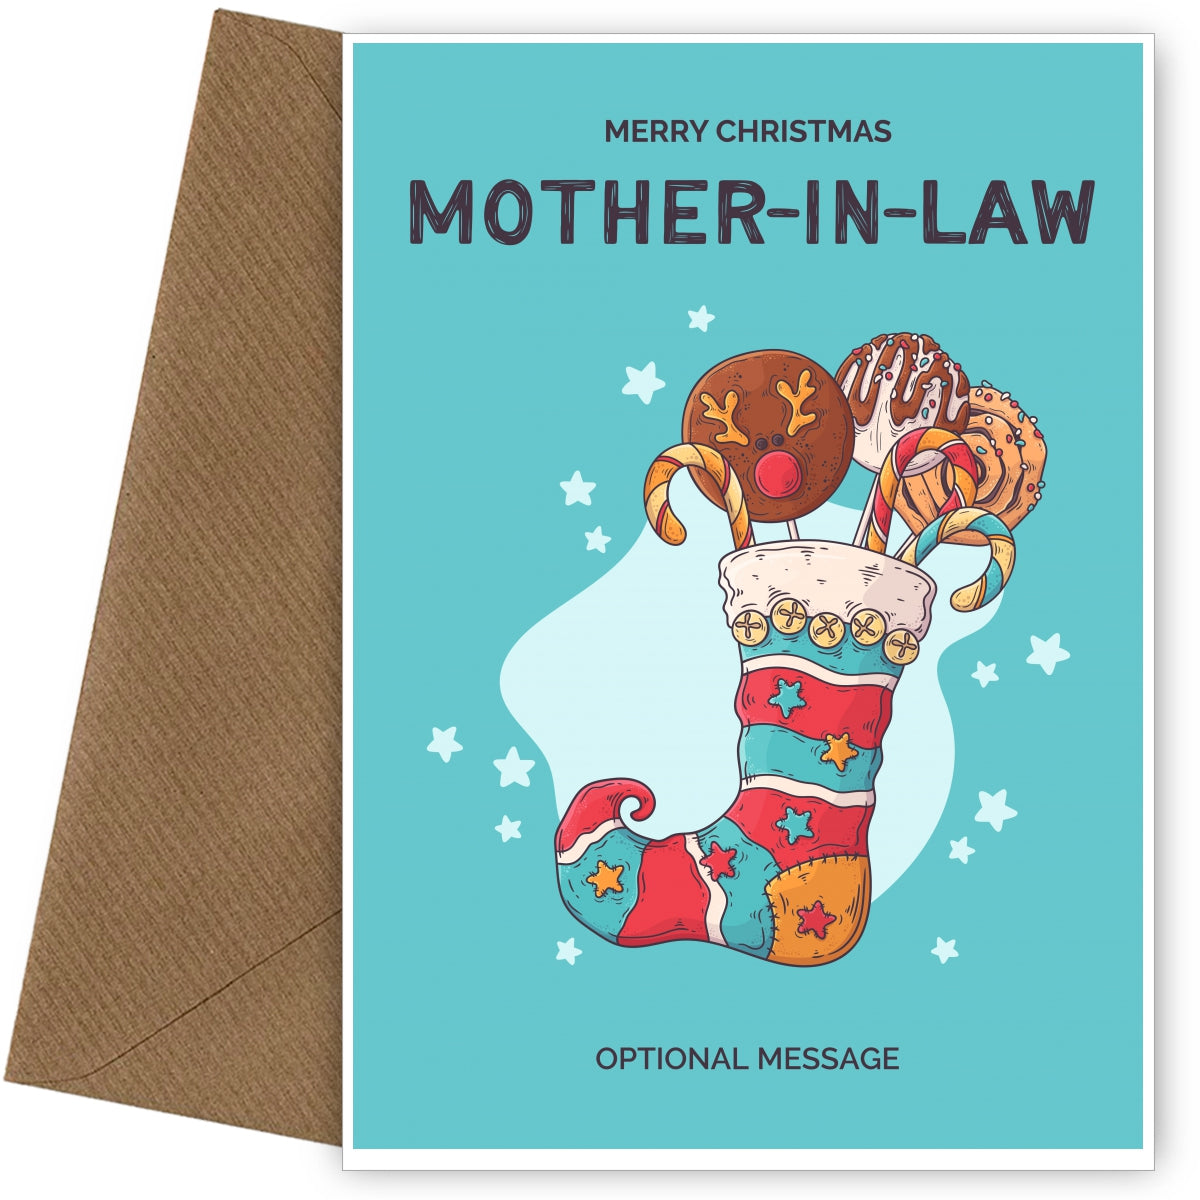 Mother-in-law Christmas Card - Hand Drawn Stocking